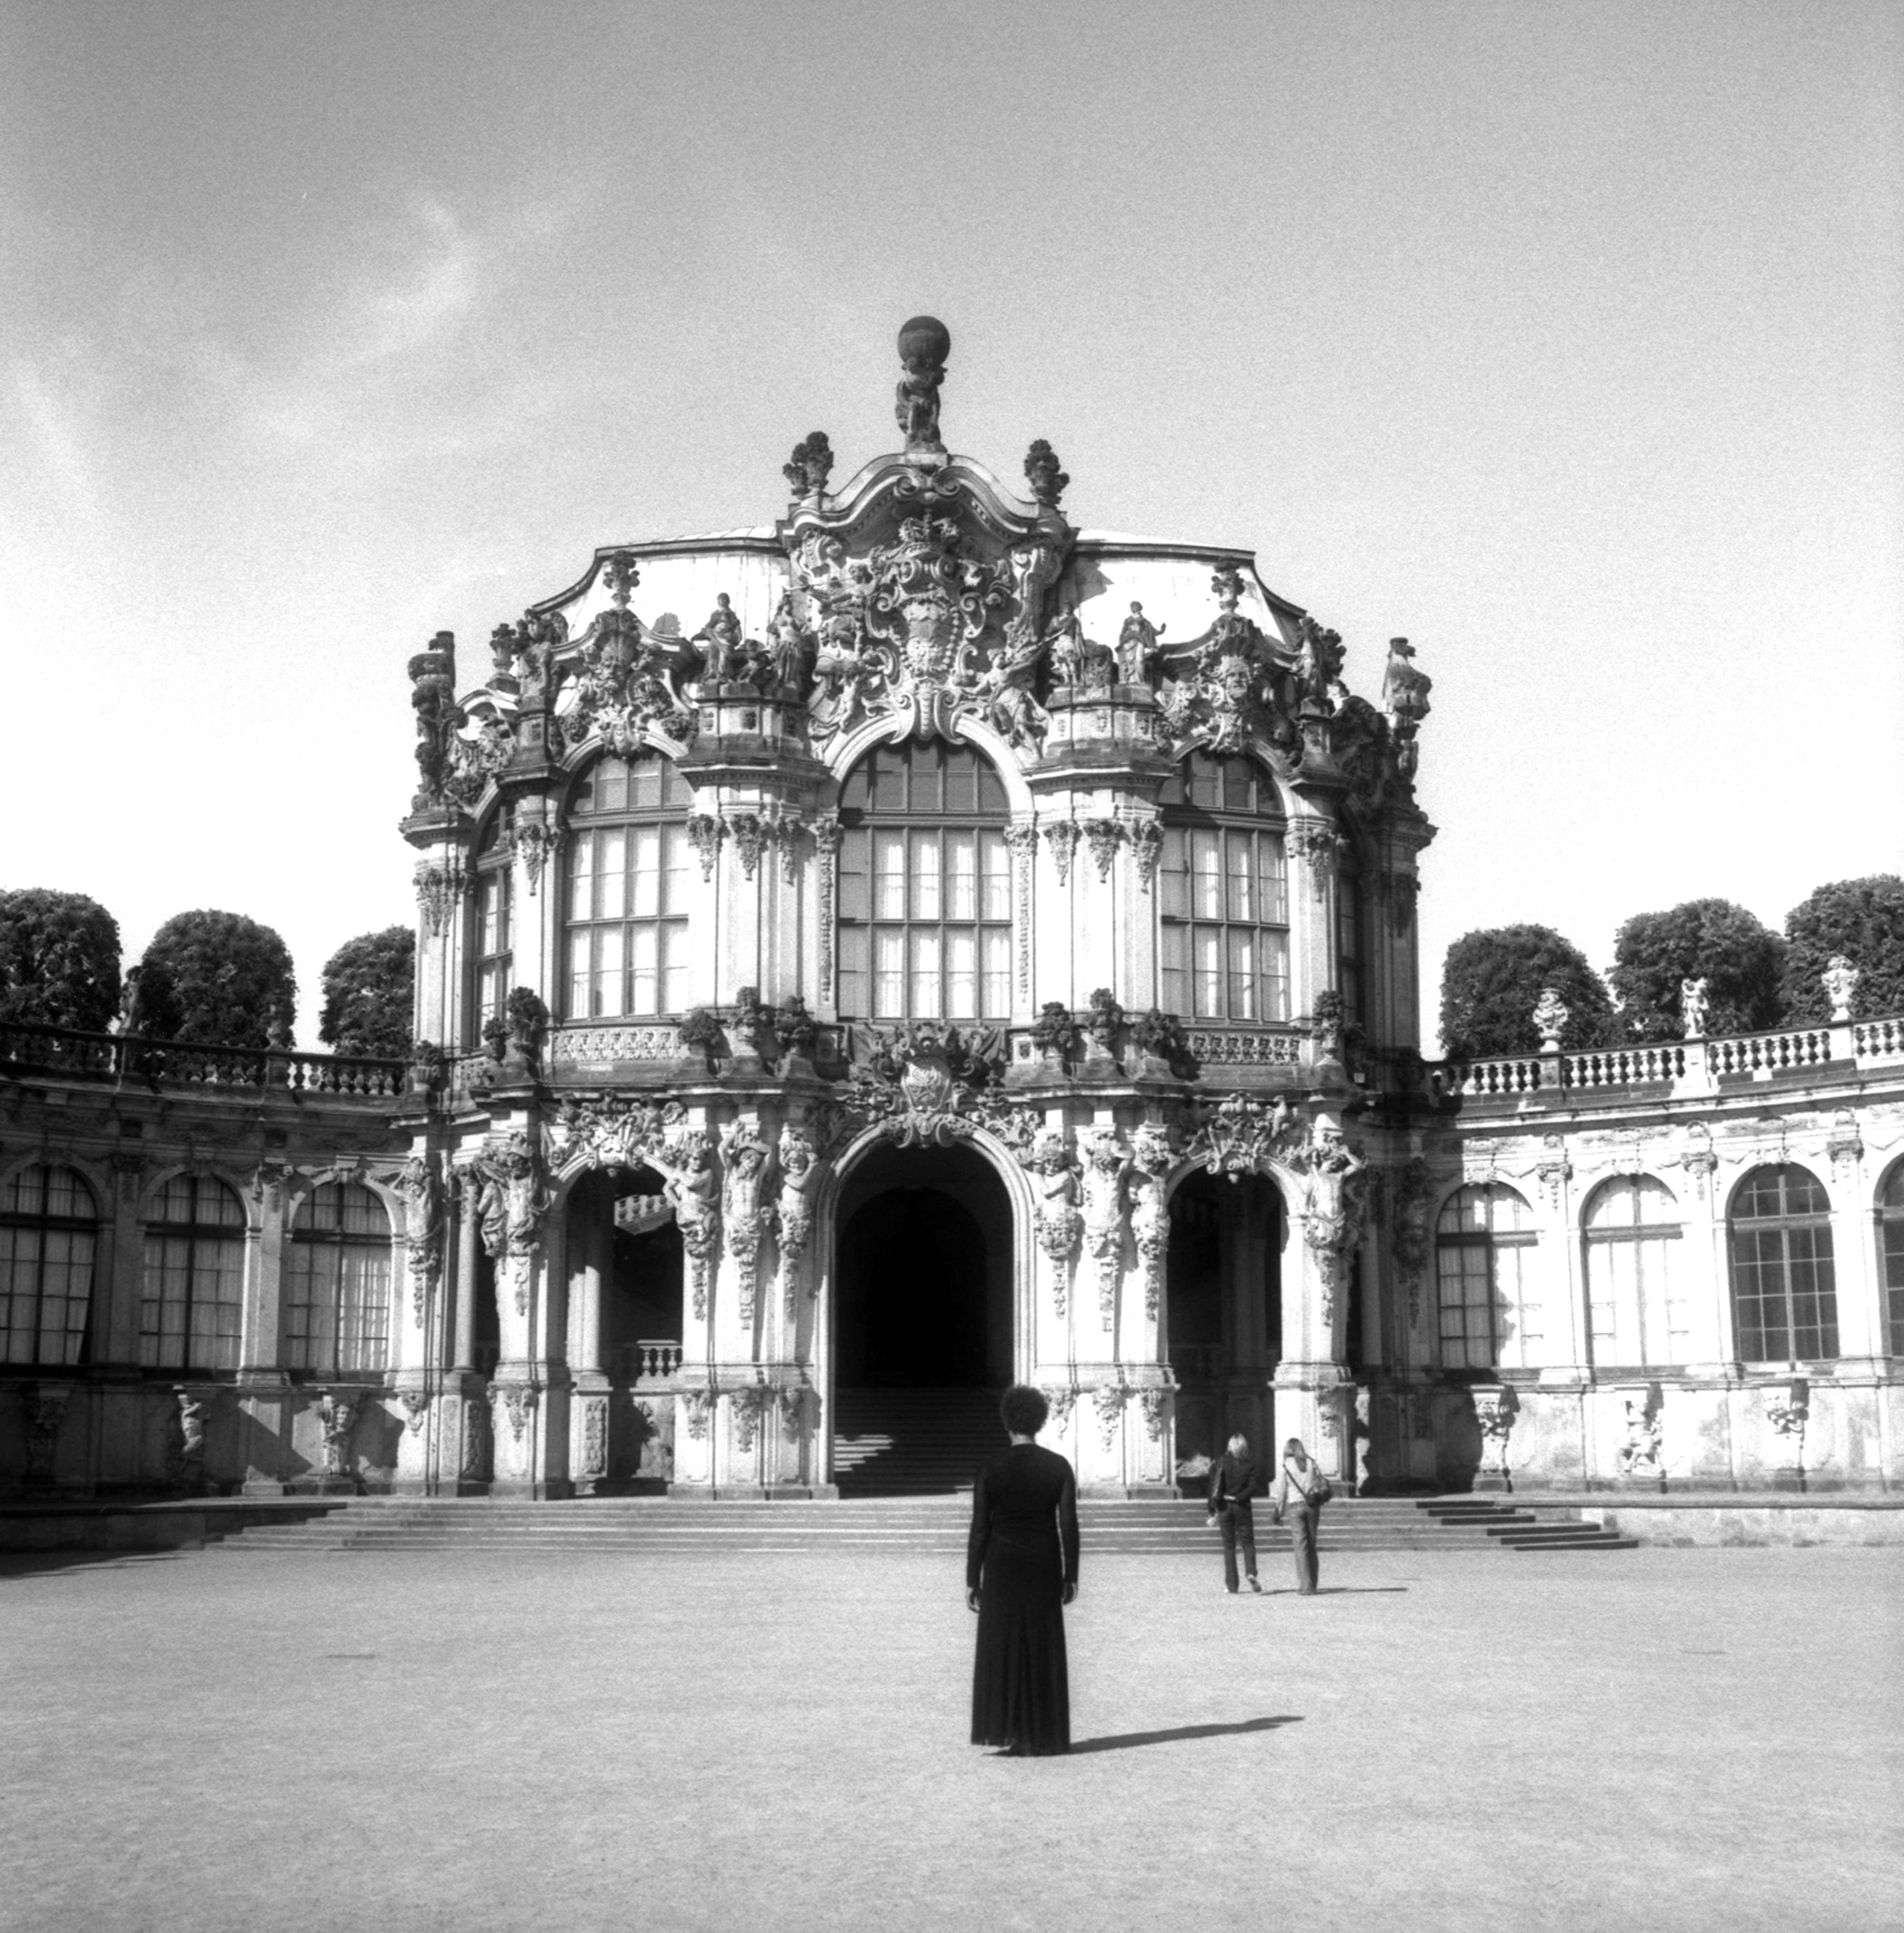 Galerie Barbara Thumm \ Carrie Mae Weems: Zwinger Palace (CMW-06-0001) \ Zwinger Palace (2006)